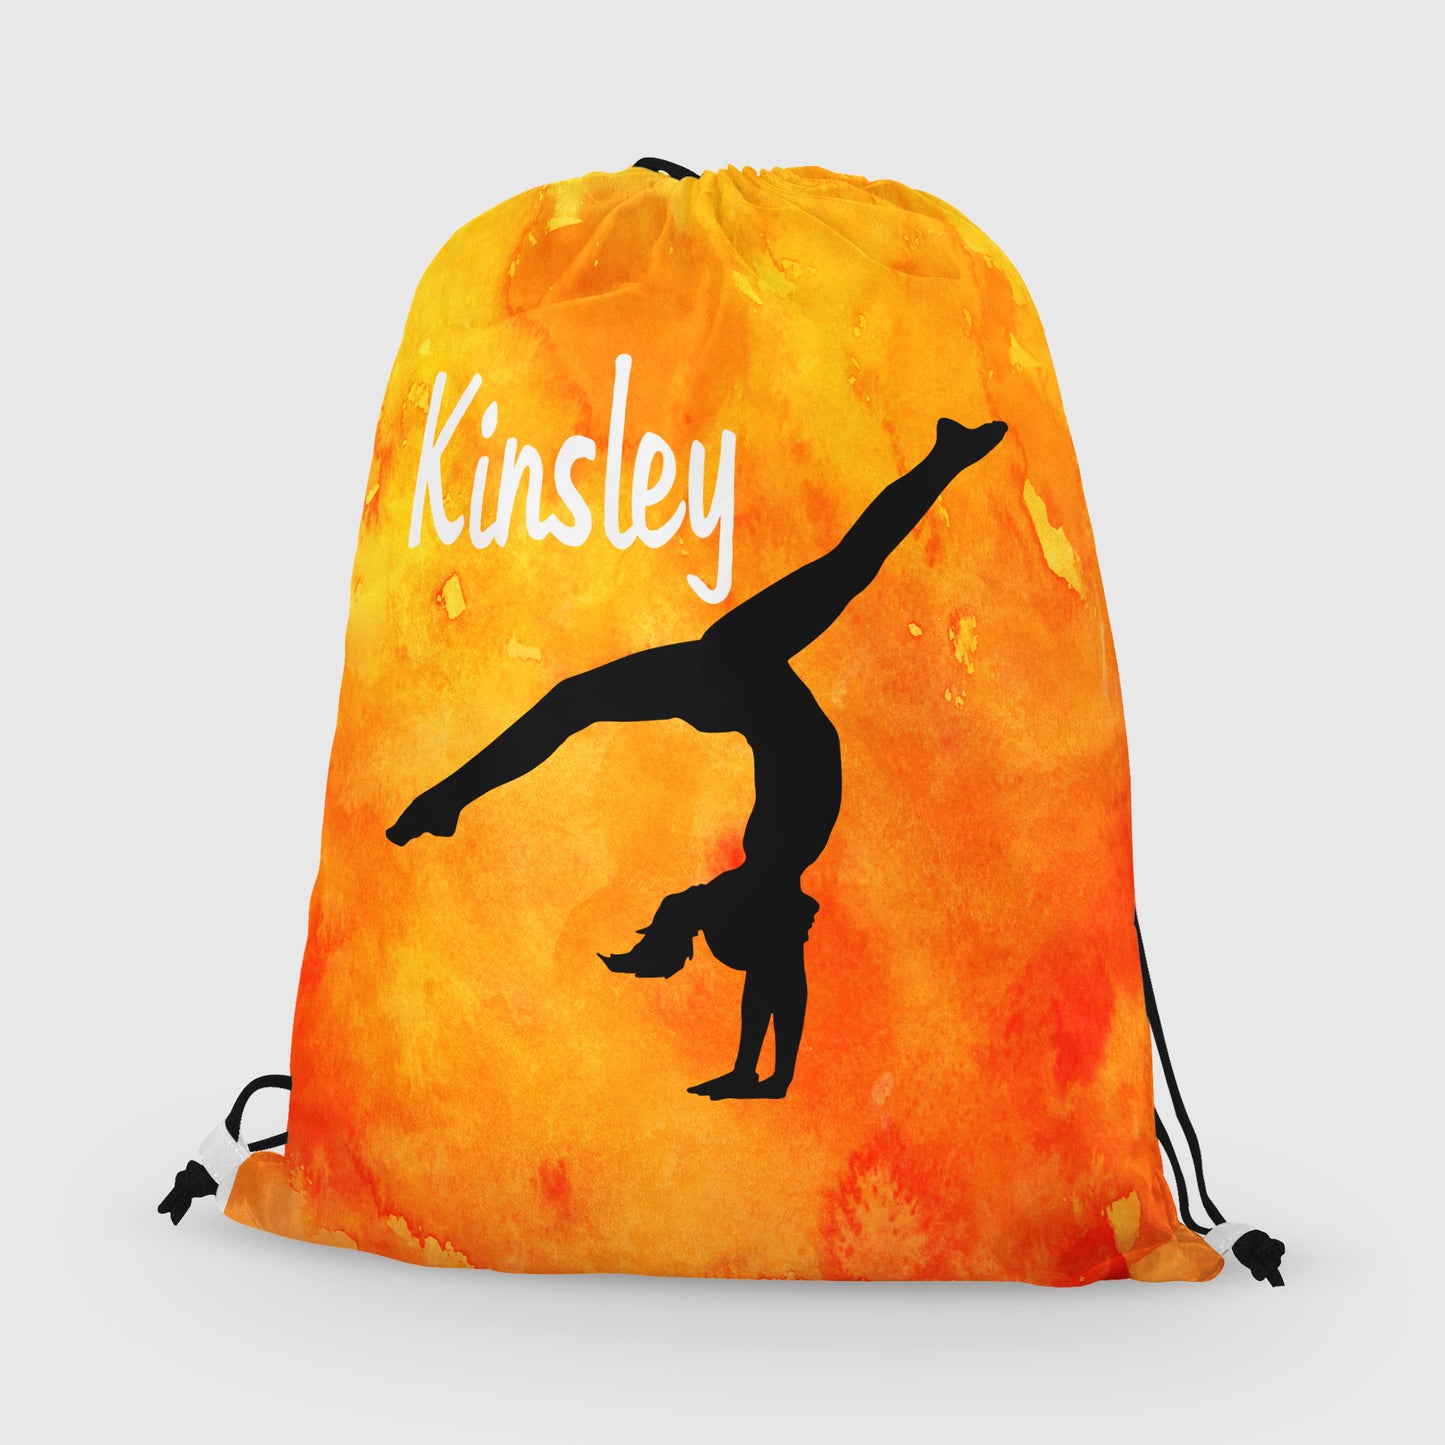 Personalized Gymnast Handstand Drawstring Bag, Perfect Gymnast Gift!